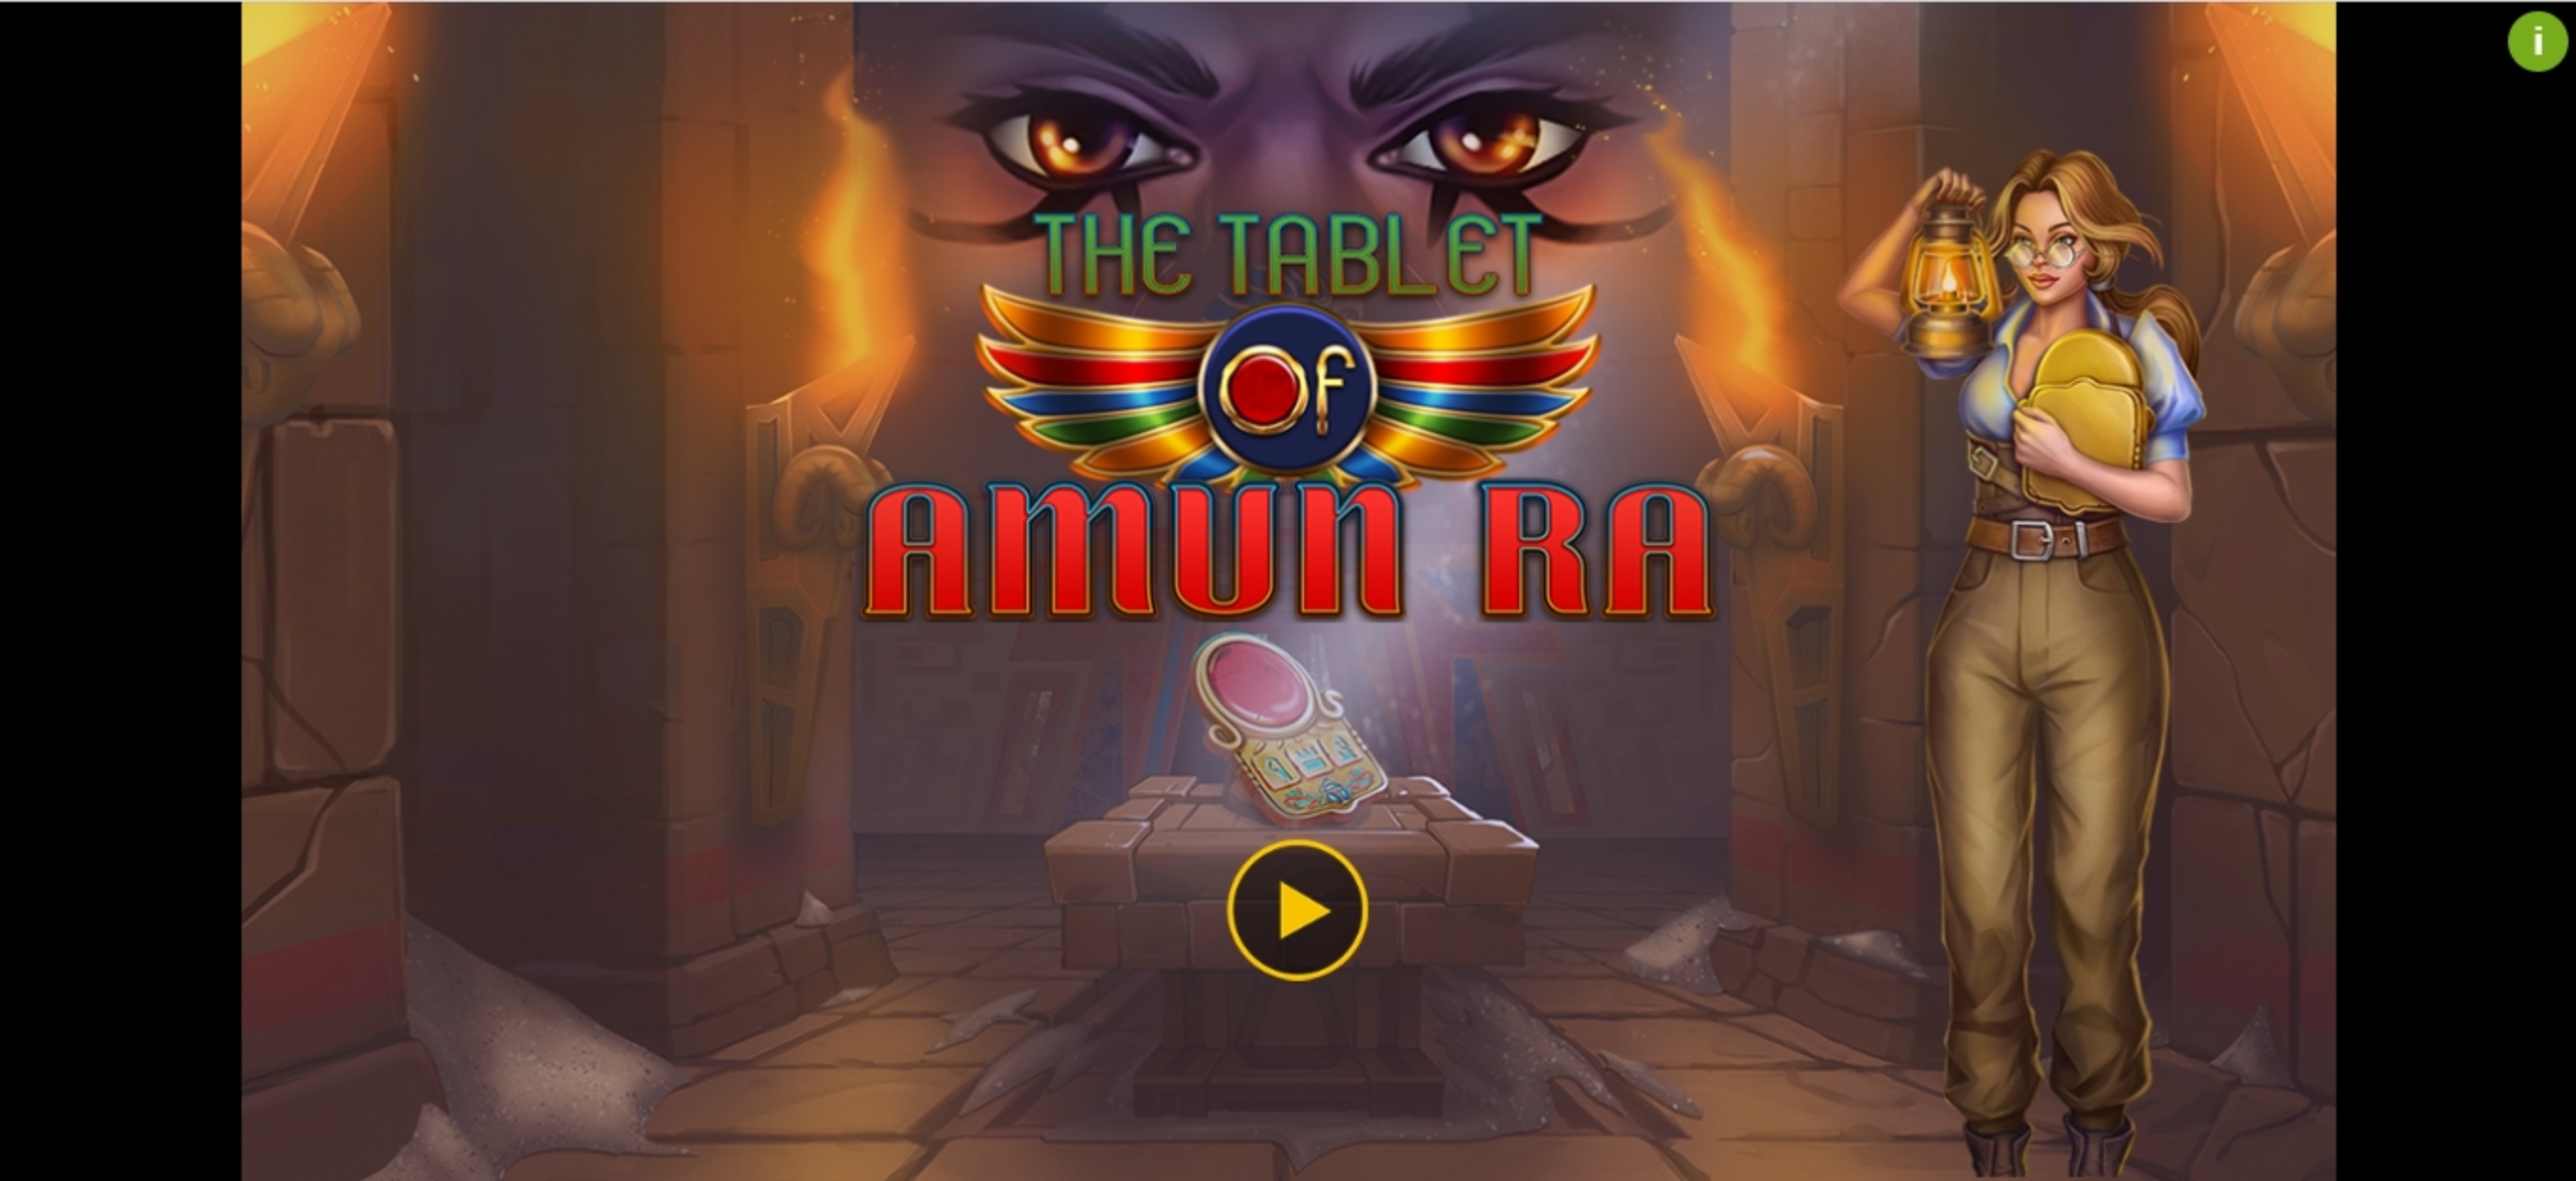 Play The Tablet of Amun Ra Free Casino Slot Game by HungryBear